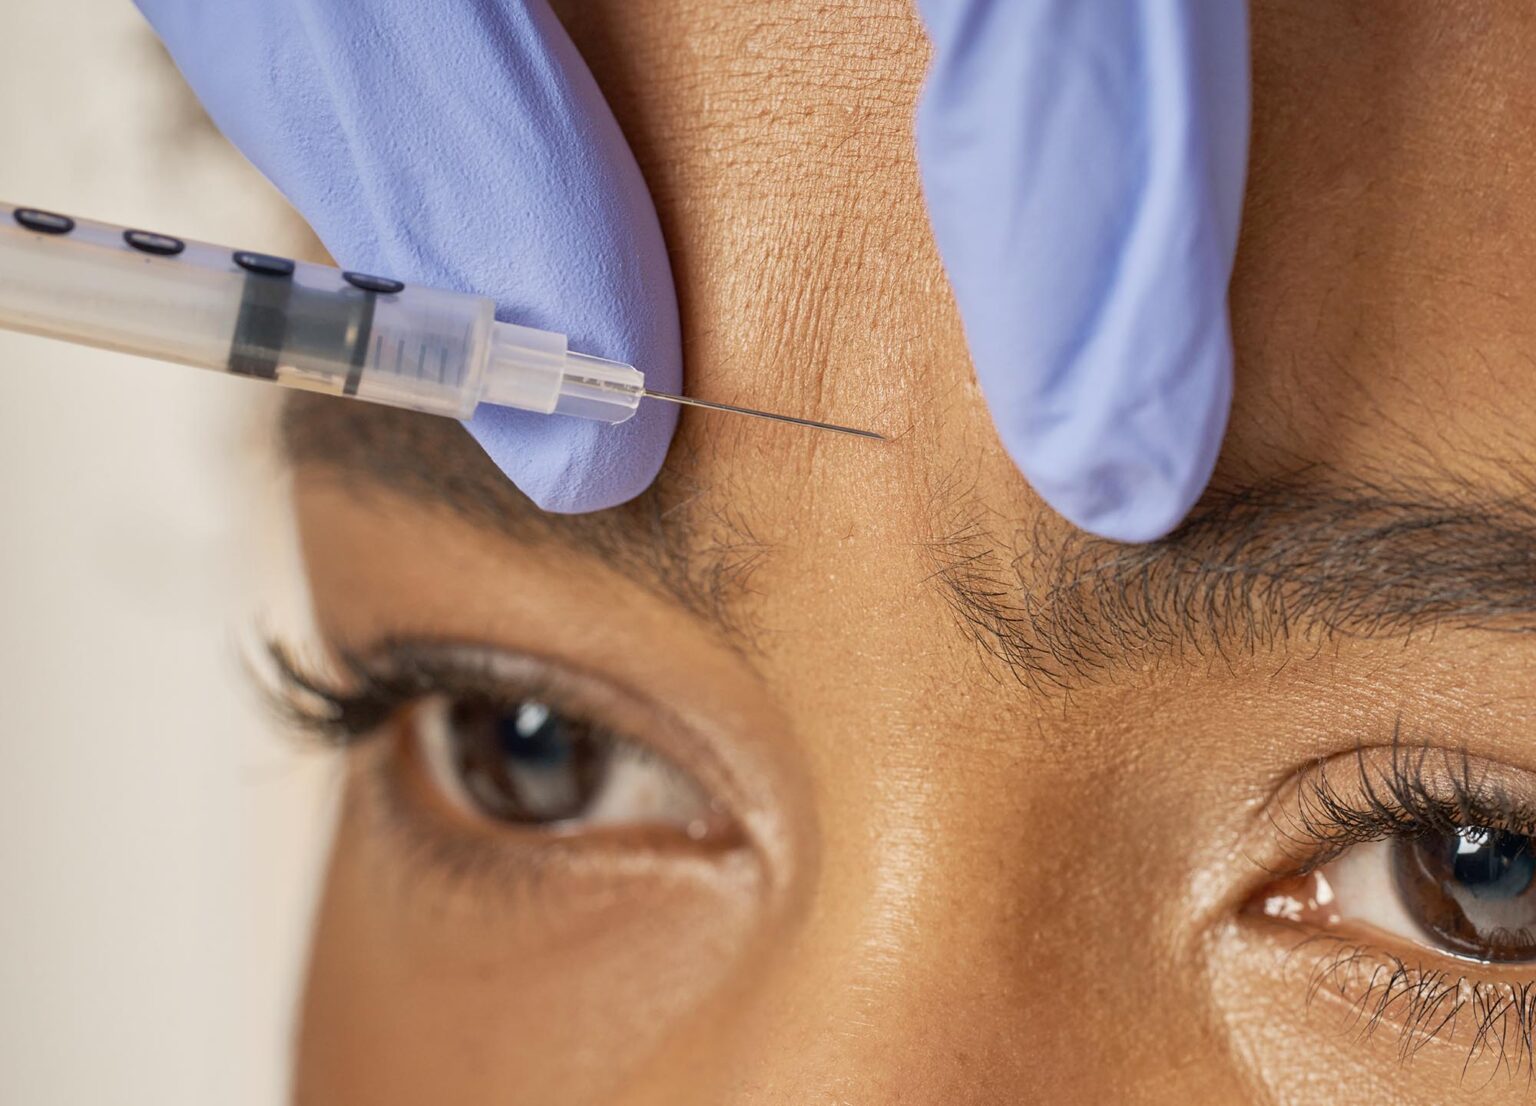 Do you know the optimal injection depth of Botox?